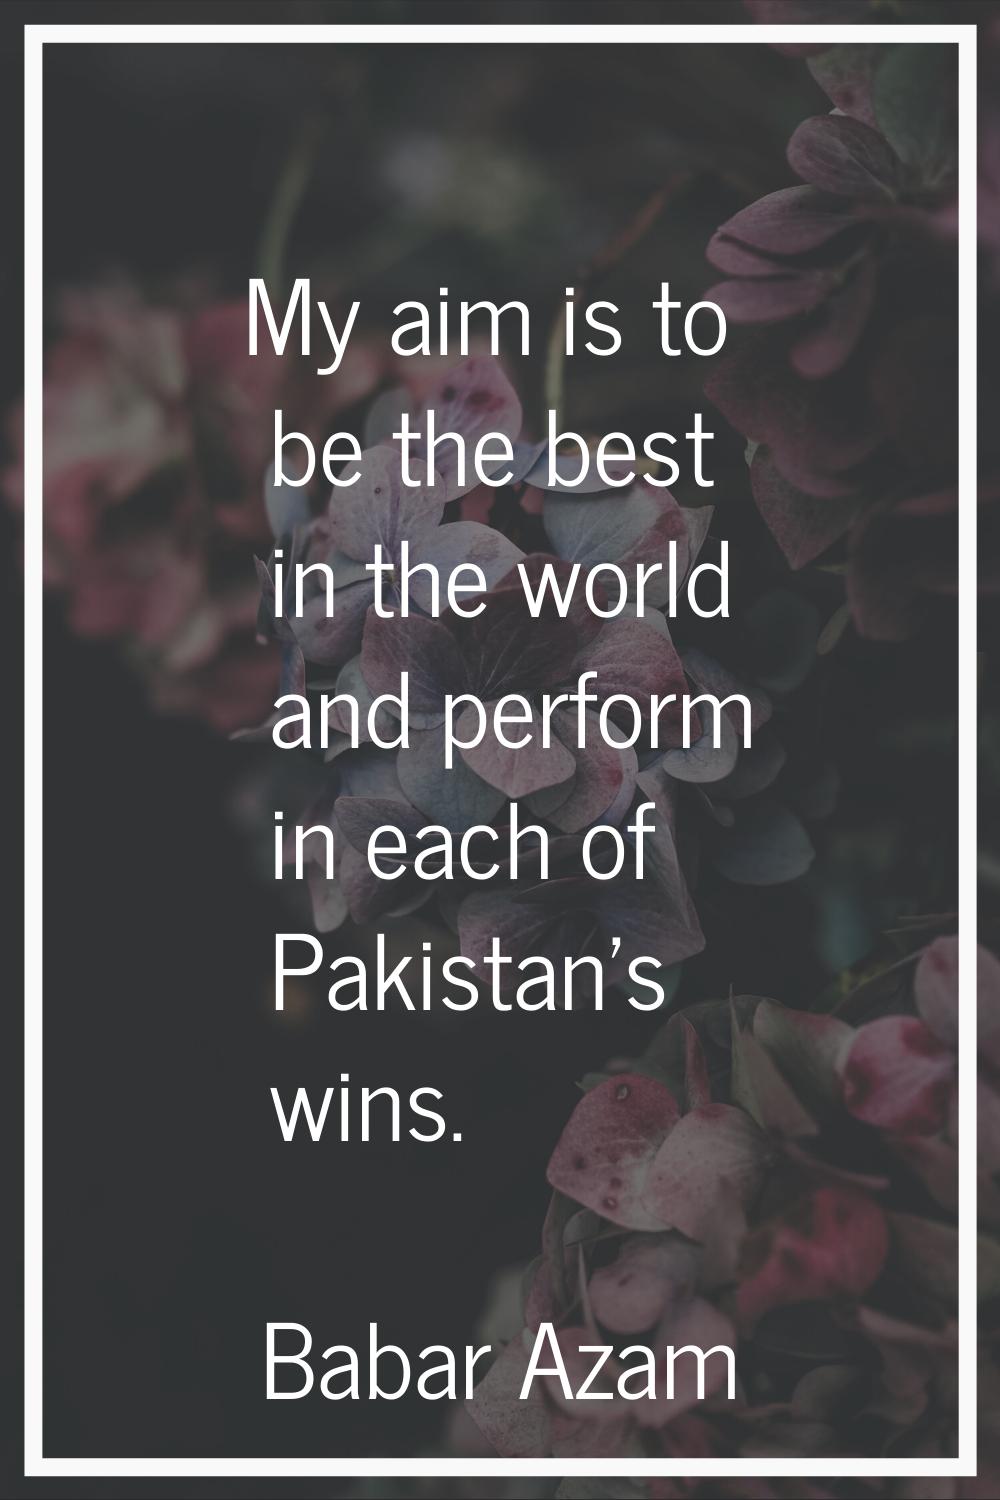 My aim is to be the best in the world and perform in each of Pakistan's wins.